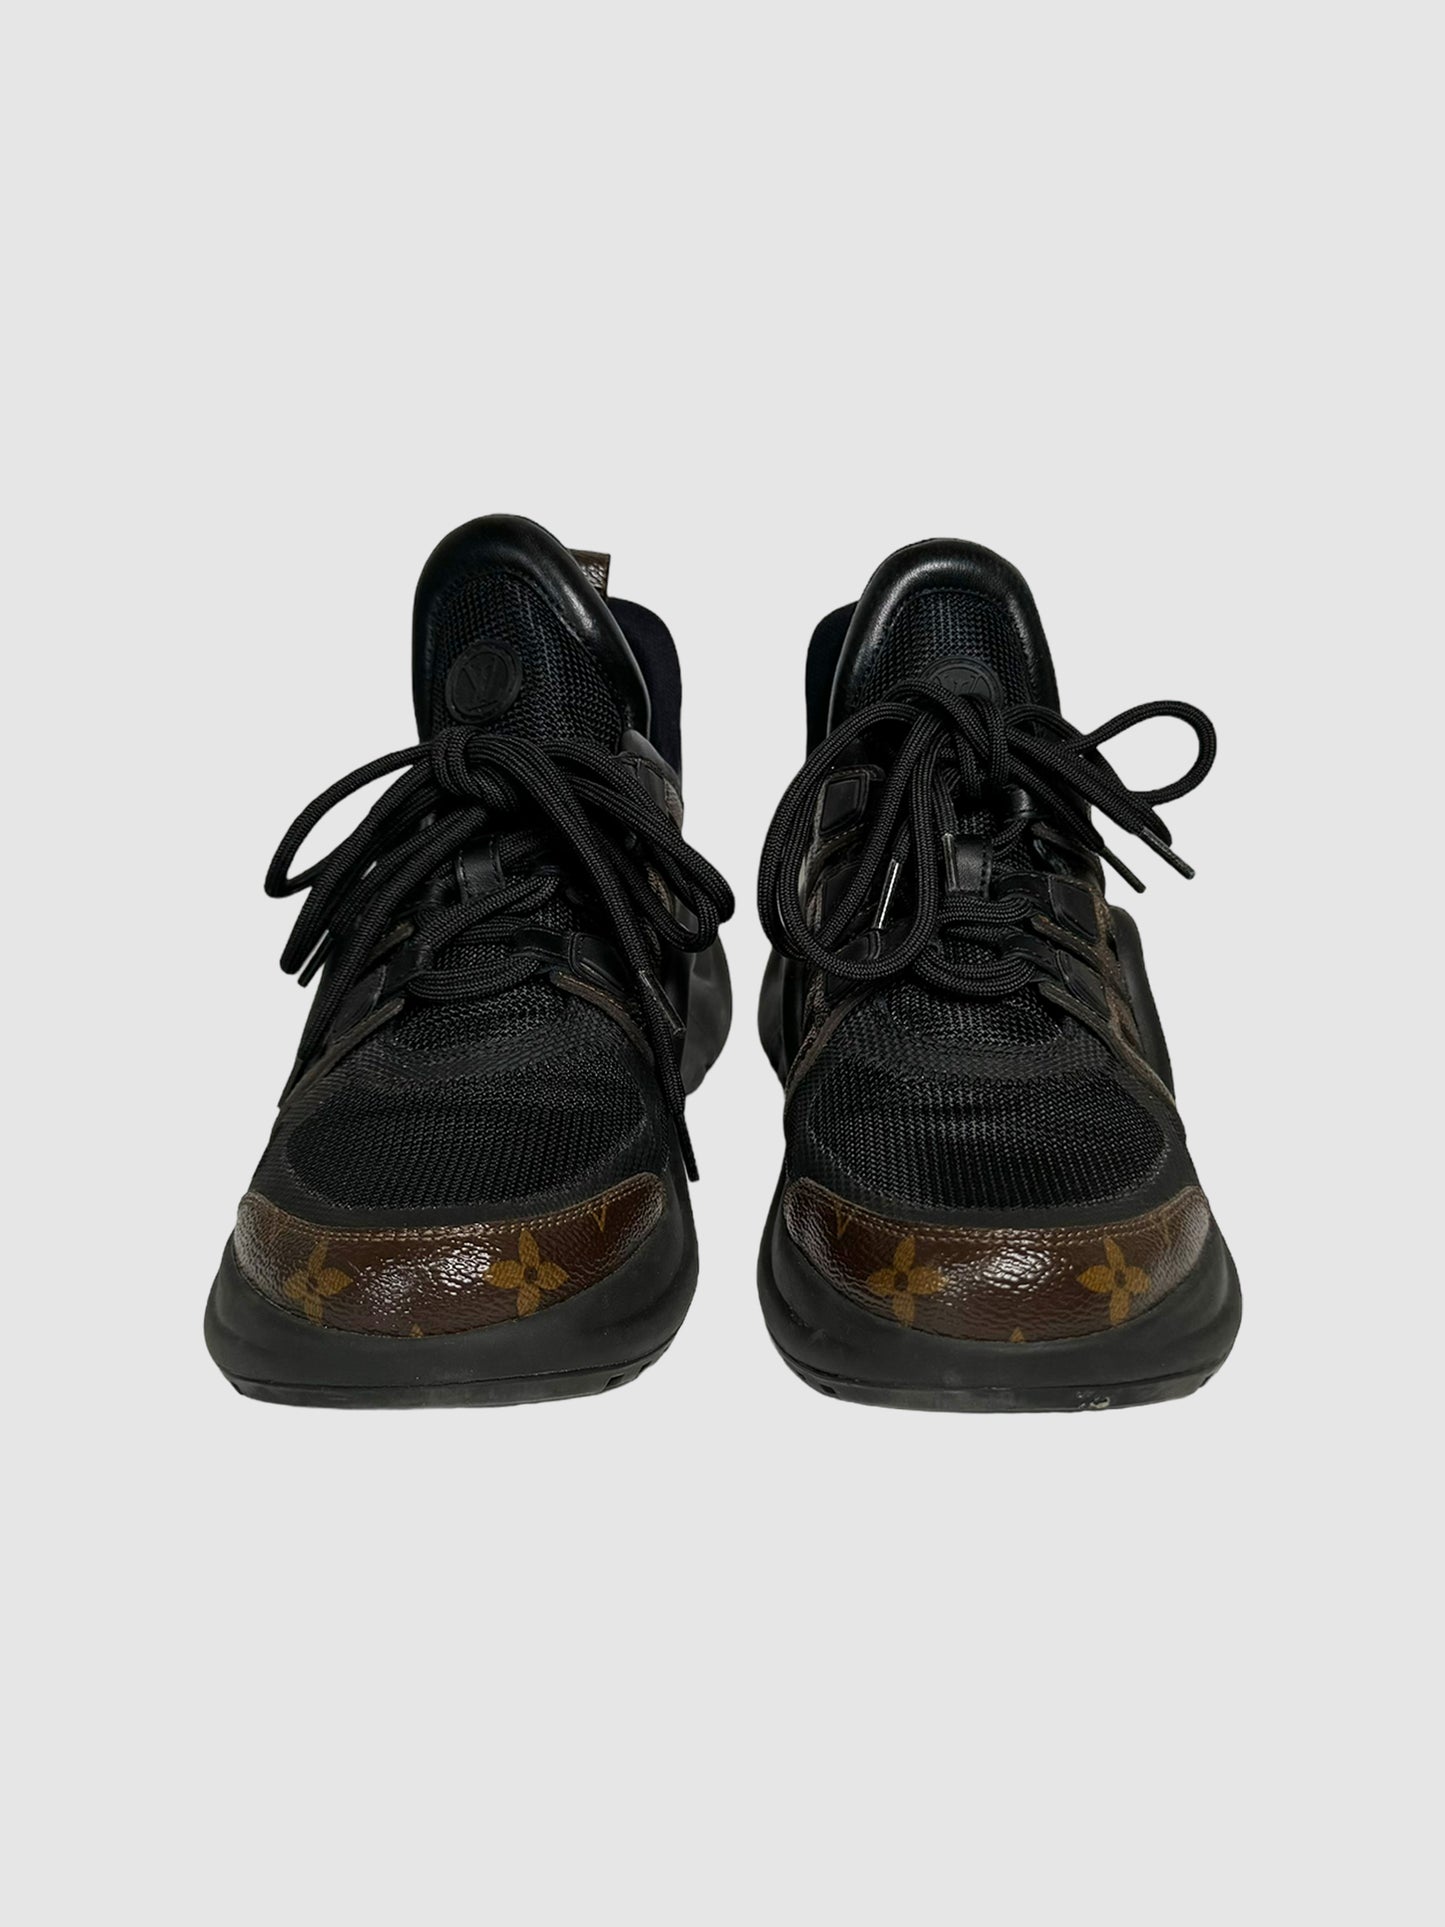 Louis Vuitton "LV Archlight" Lace-Up Sneakers in Black and Brown Leather Monogram Trim Secondhand Luxury Thrift Designer